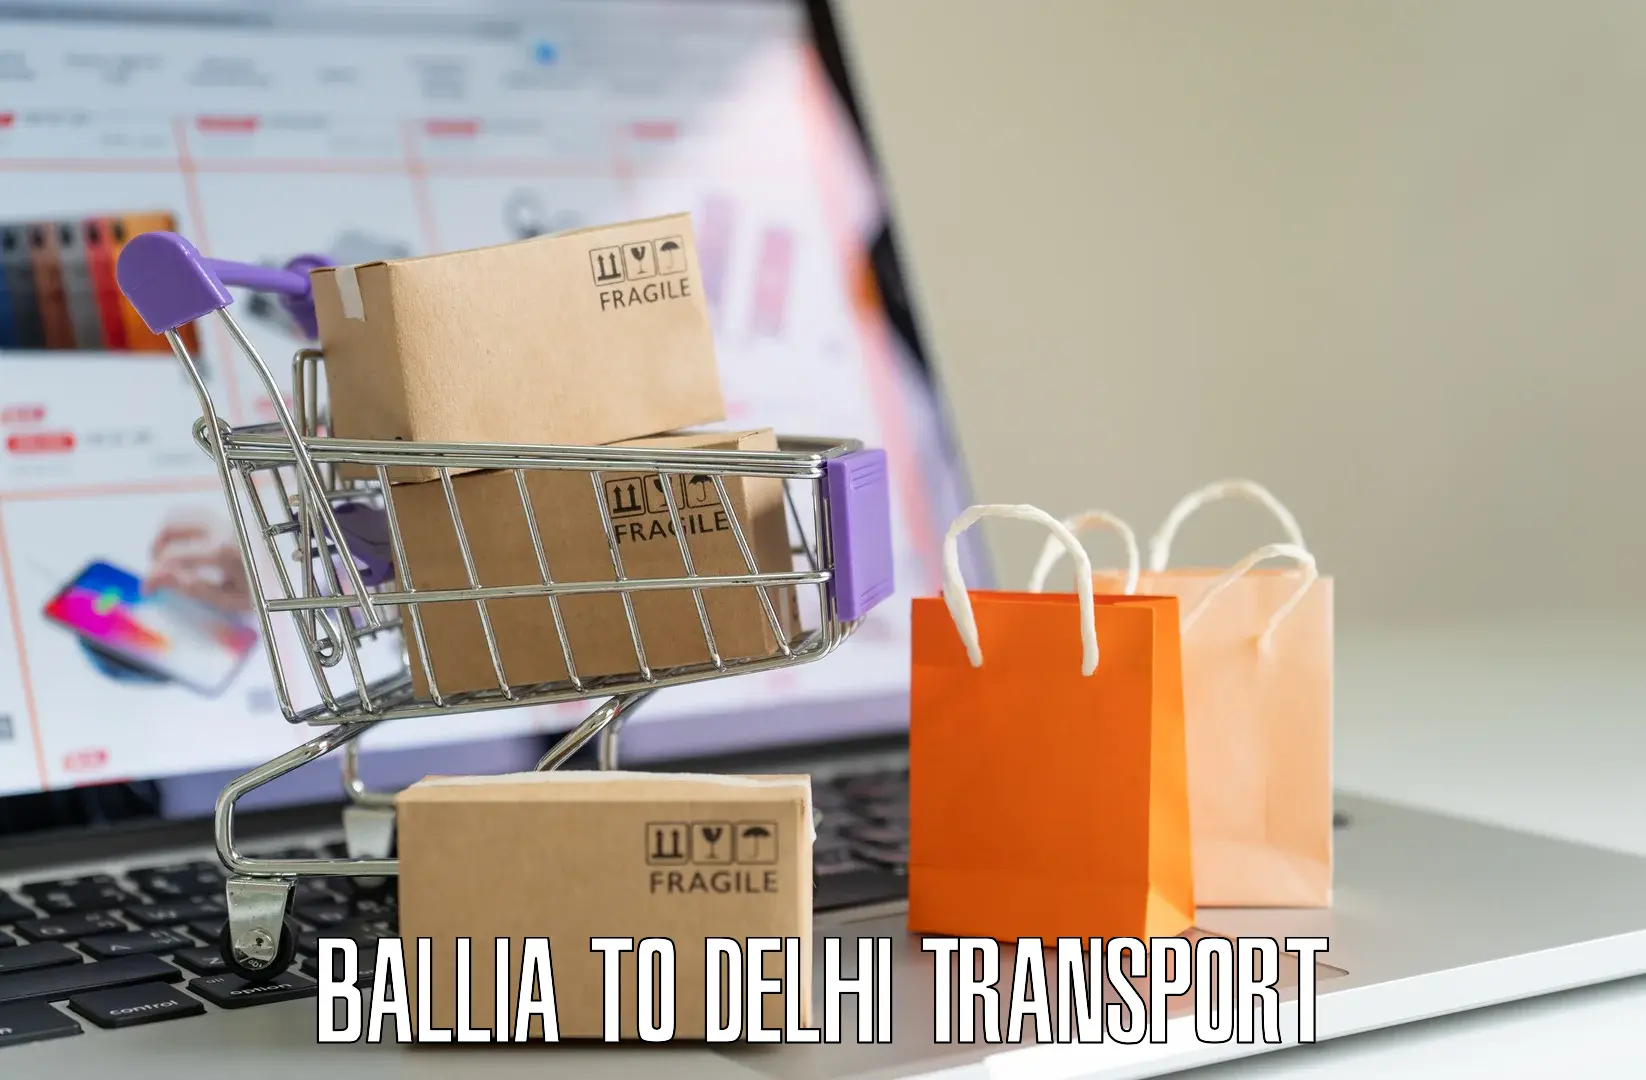 Vehicle transport services Ballia to NCR